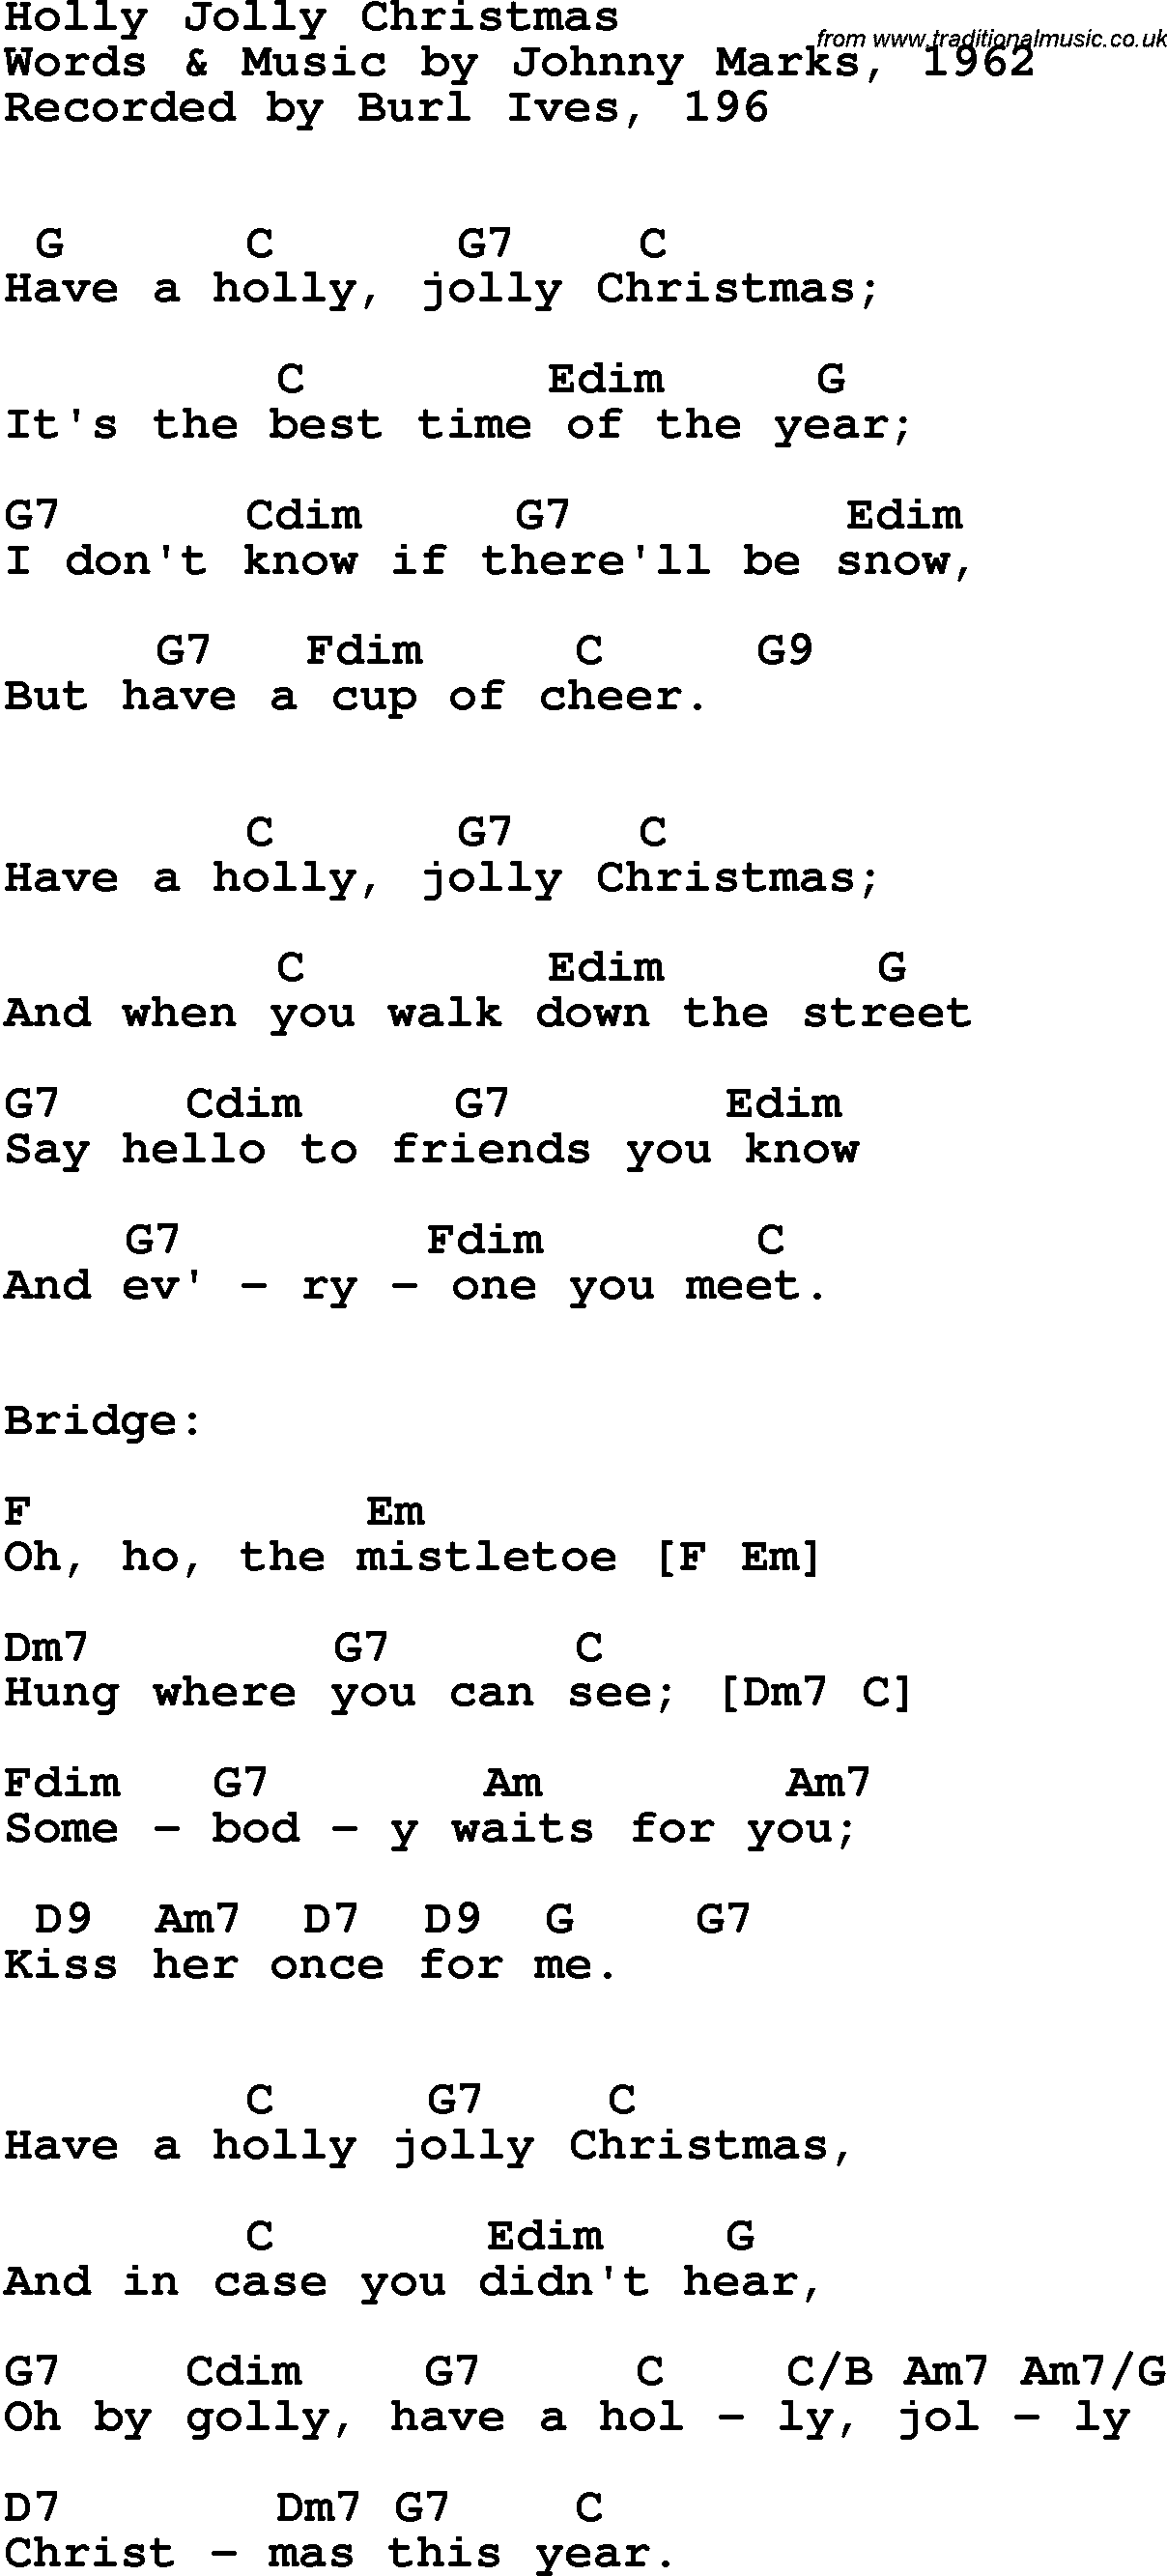 Song Lyrics with guitar chords for Holly Jolly Christmas - Burl Ives, 1965